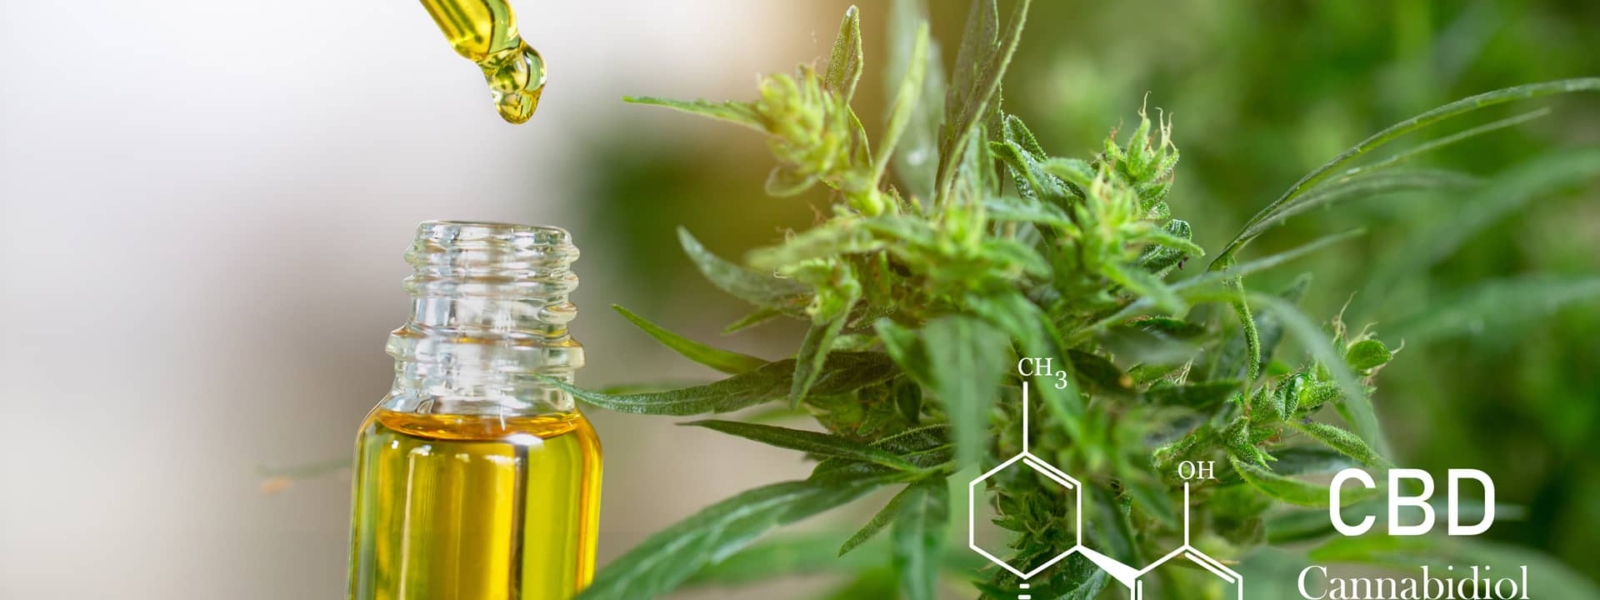 CBD elements, the hands of scientists dropping CBD oil in a vial with a hemp plant in the background.